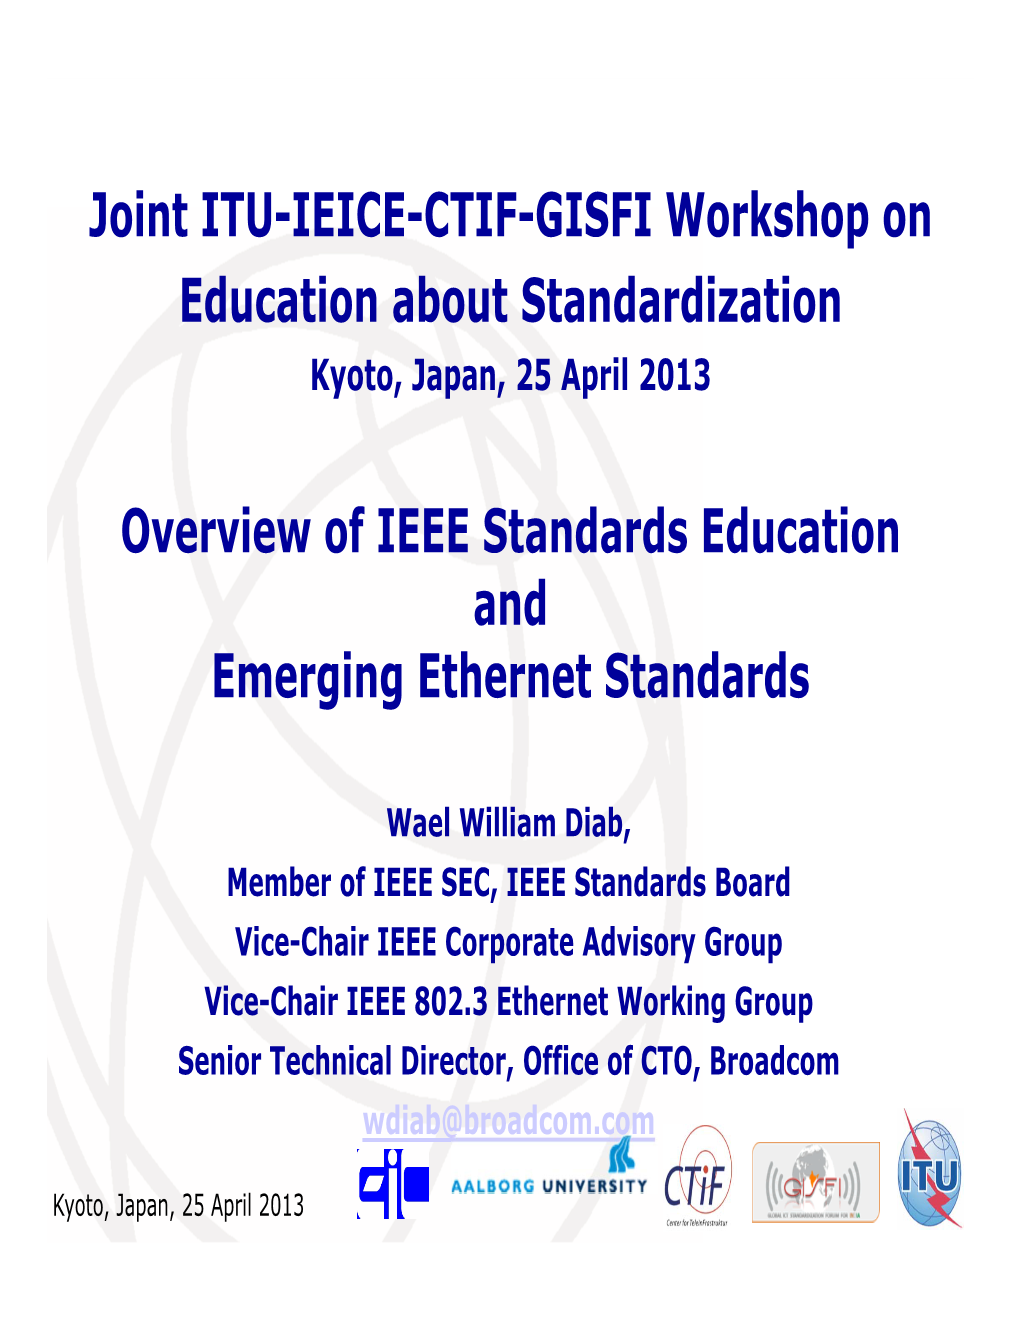 Overview of IEEE Standards Education and Emerging Ethernet Standards